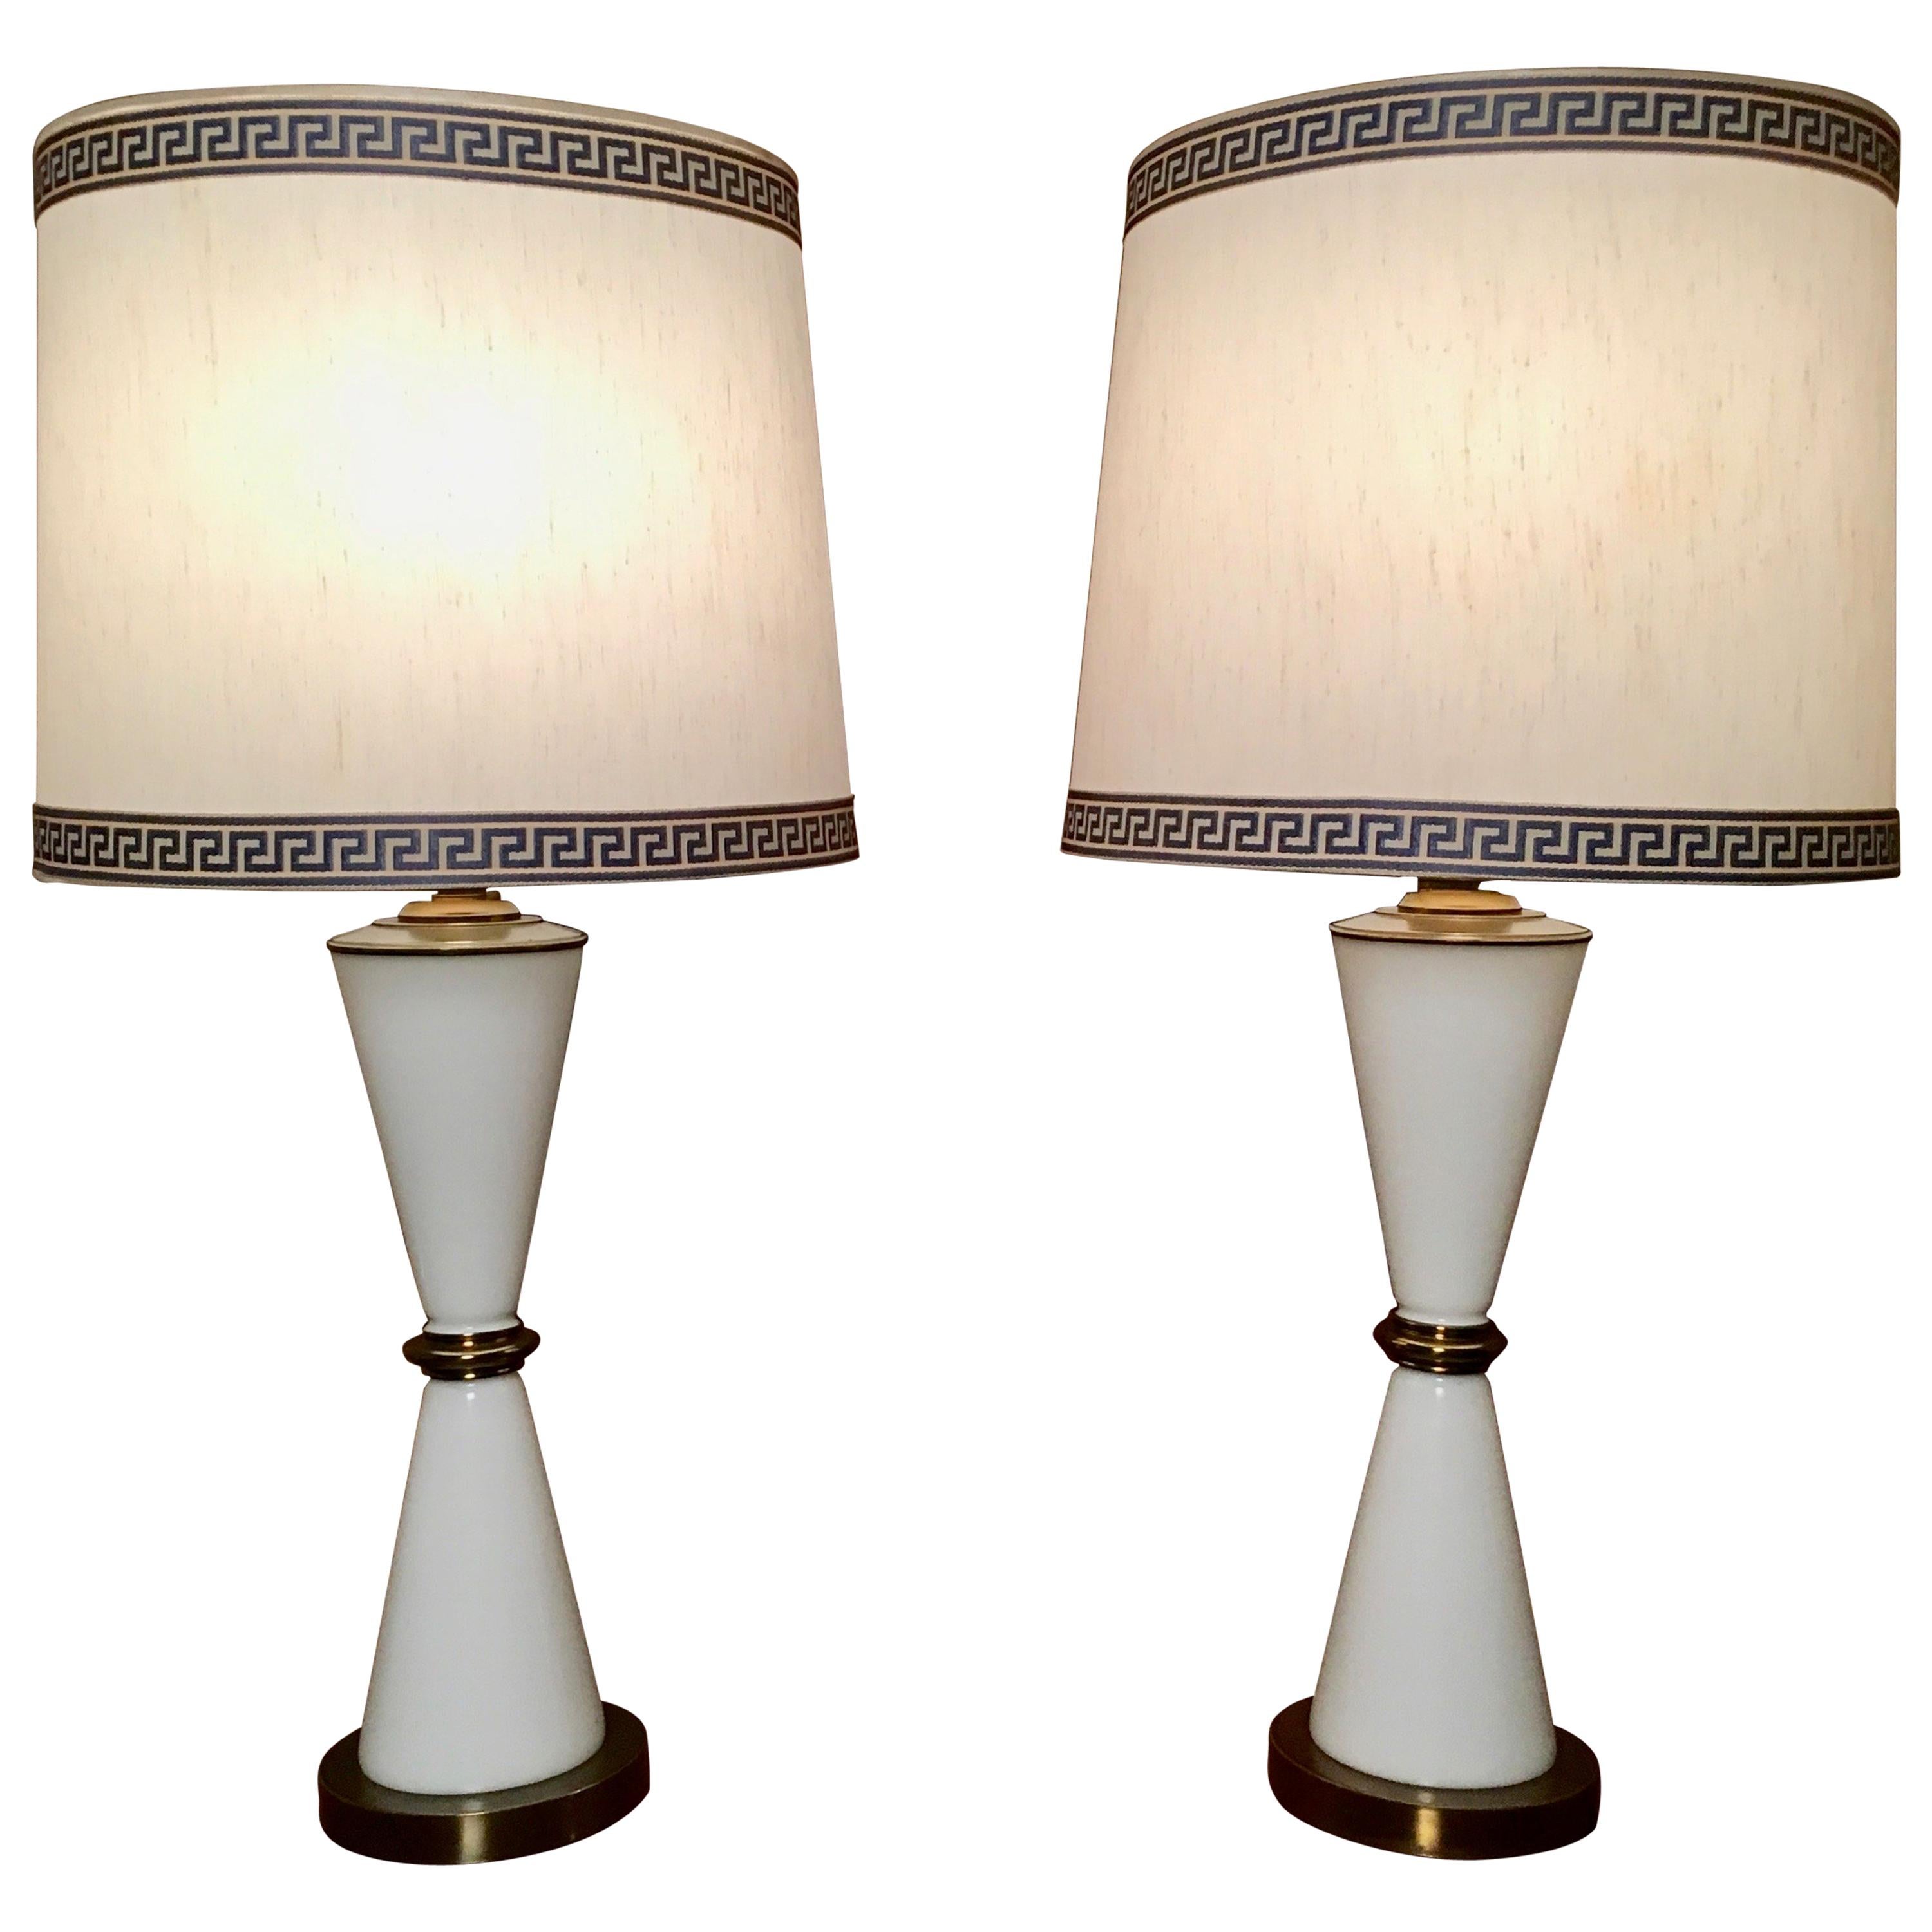 Hourglass Shaped Table Lamps